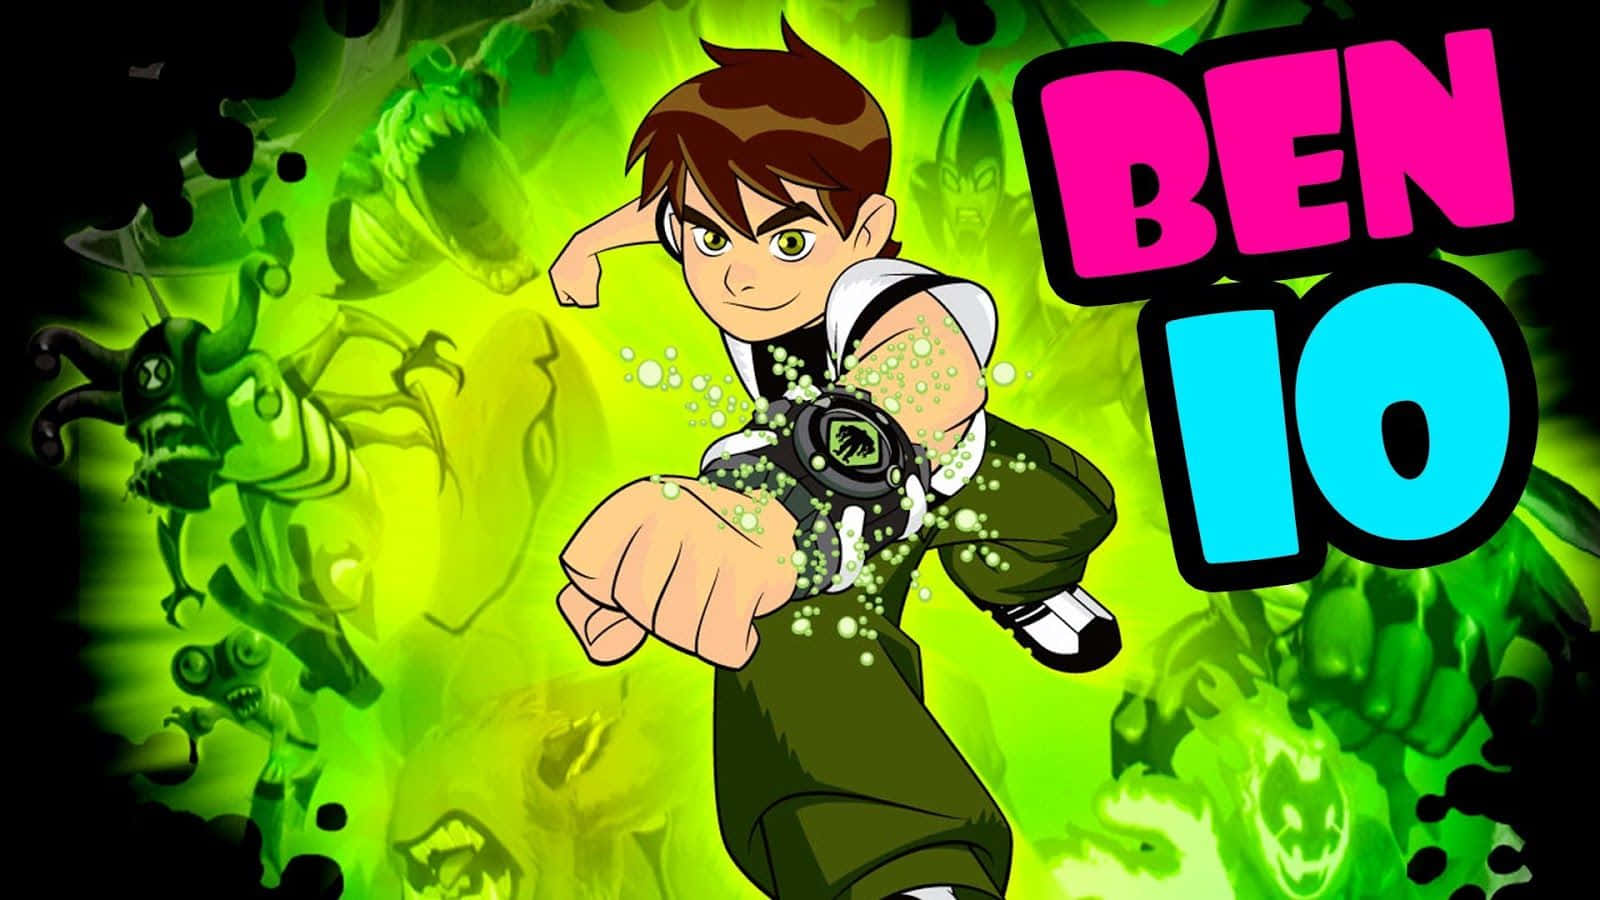 "Ben 10 confidently takes on a new challenge"